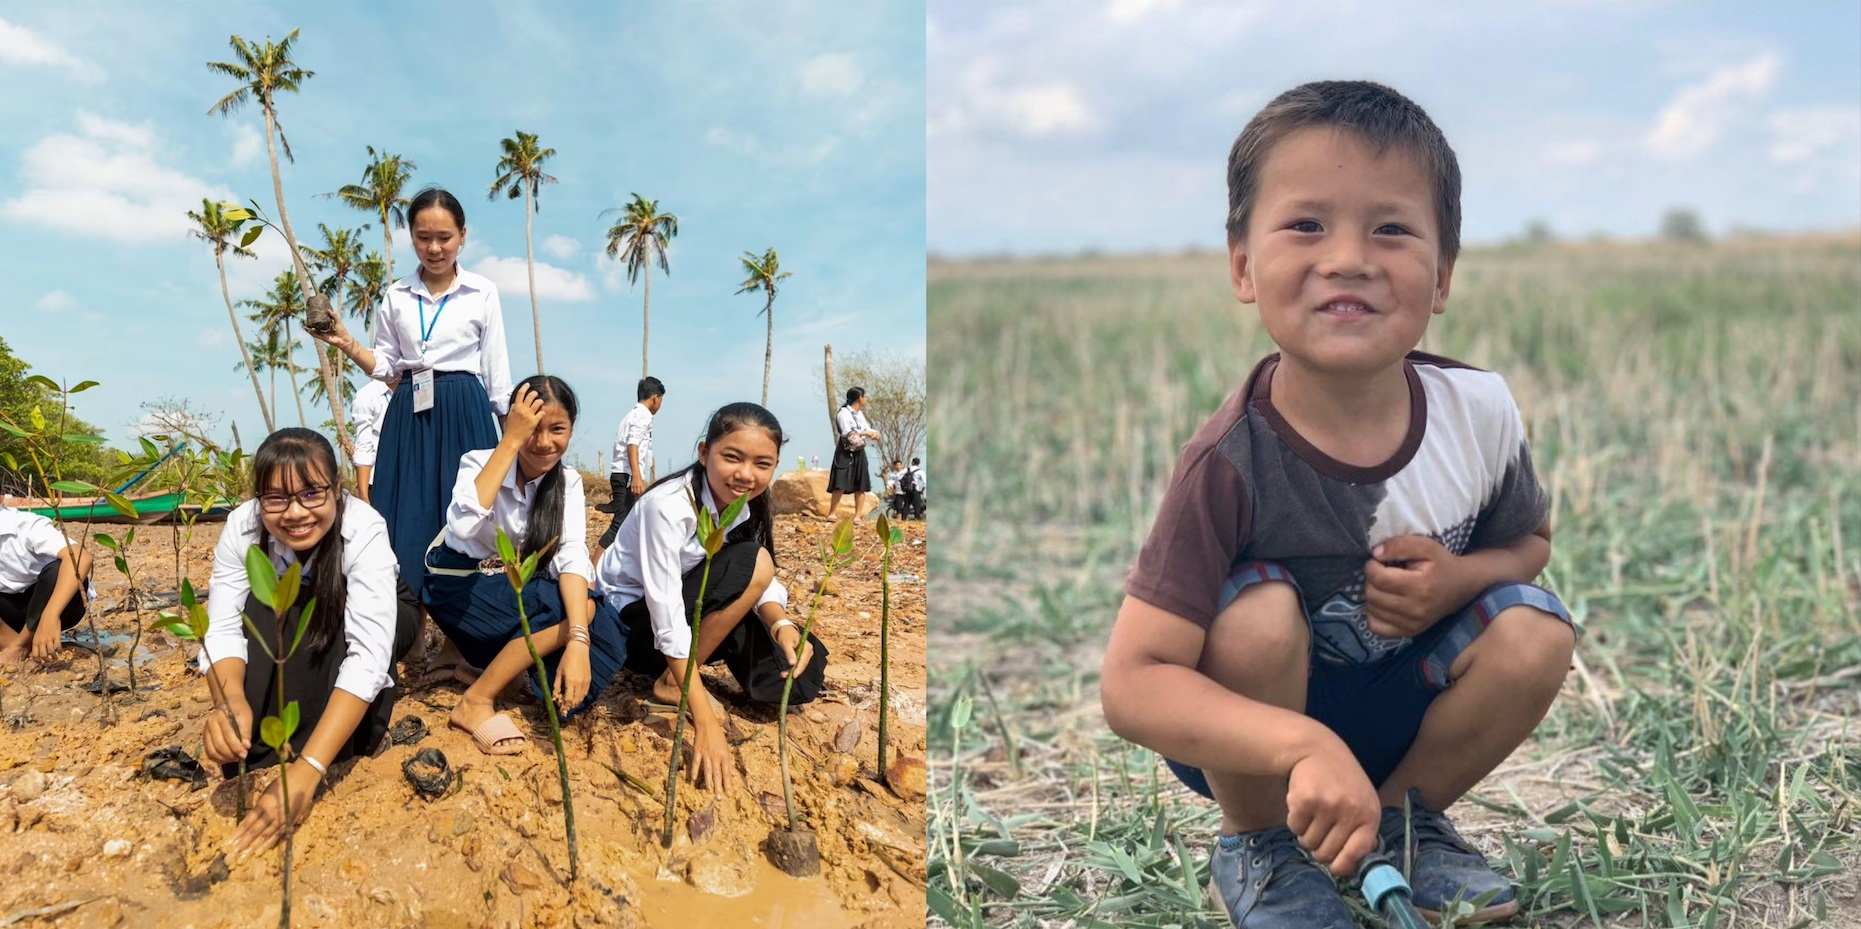 Two photos of young people planting vegetation